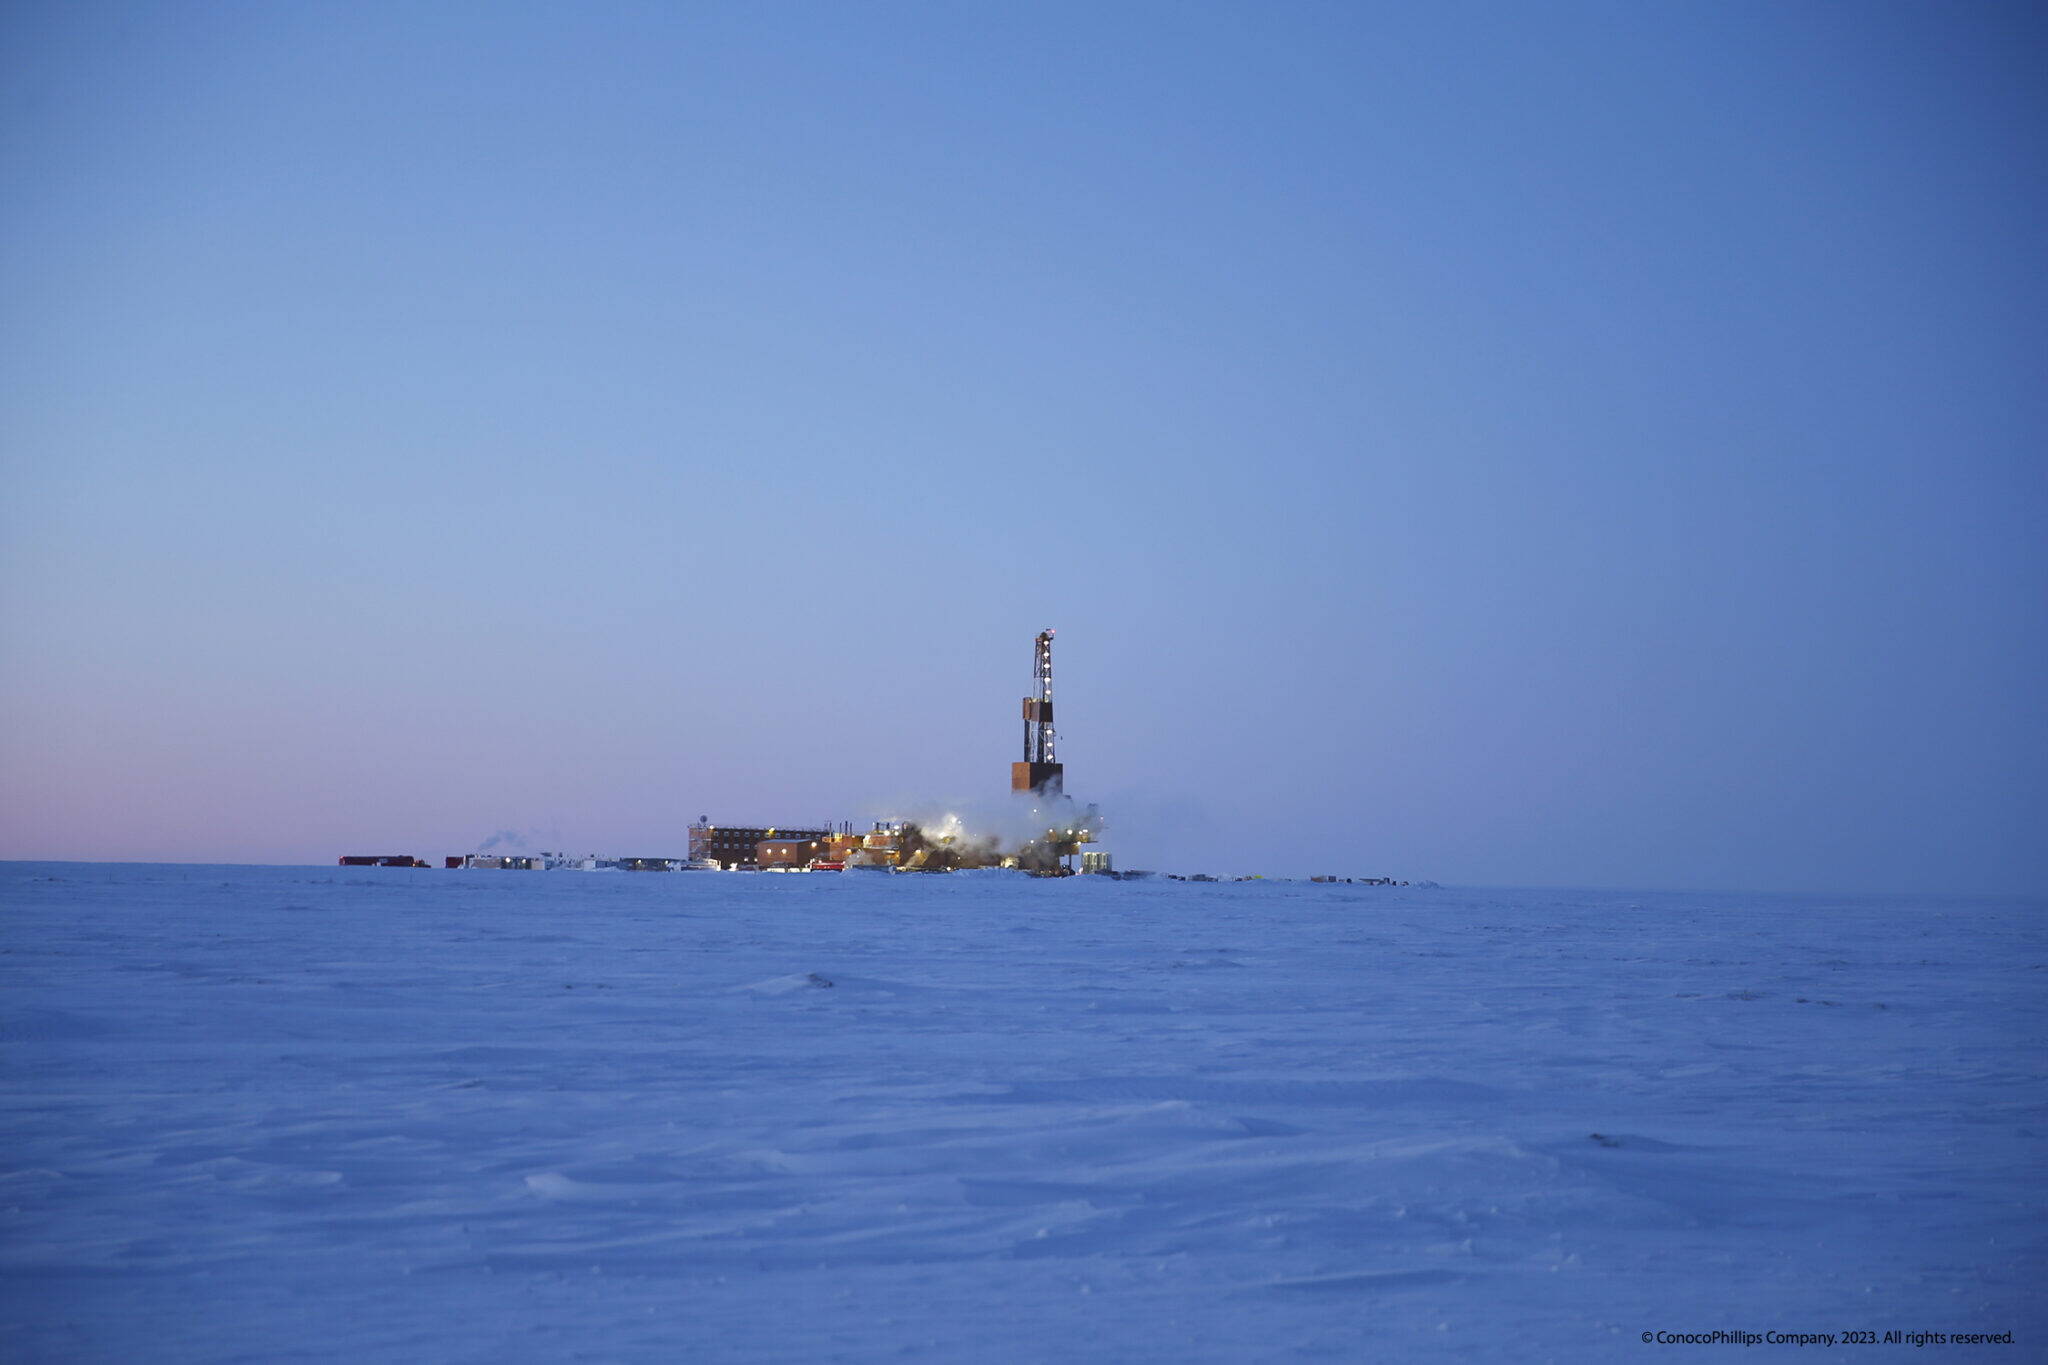 An exploration rig operates in the winter of 2019 at ConocoPhillips Alaska Inc.’s Willow prospect. The company announced on Friday that it made its final investment decision in favor of developing the huge prospect. (Photo provided by ConocoPhillips)